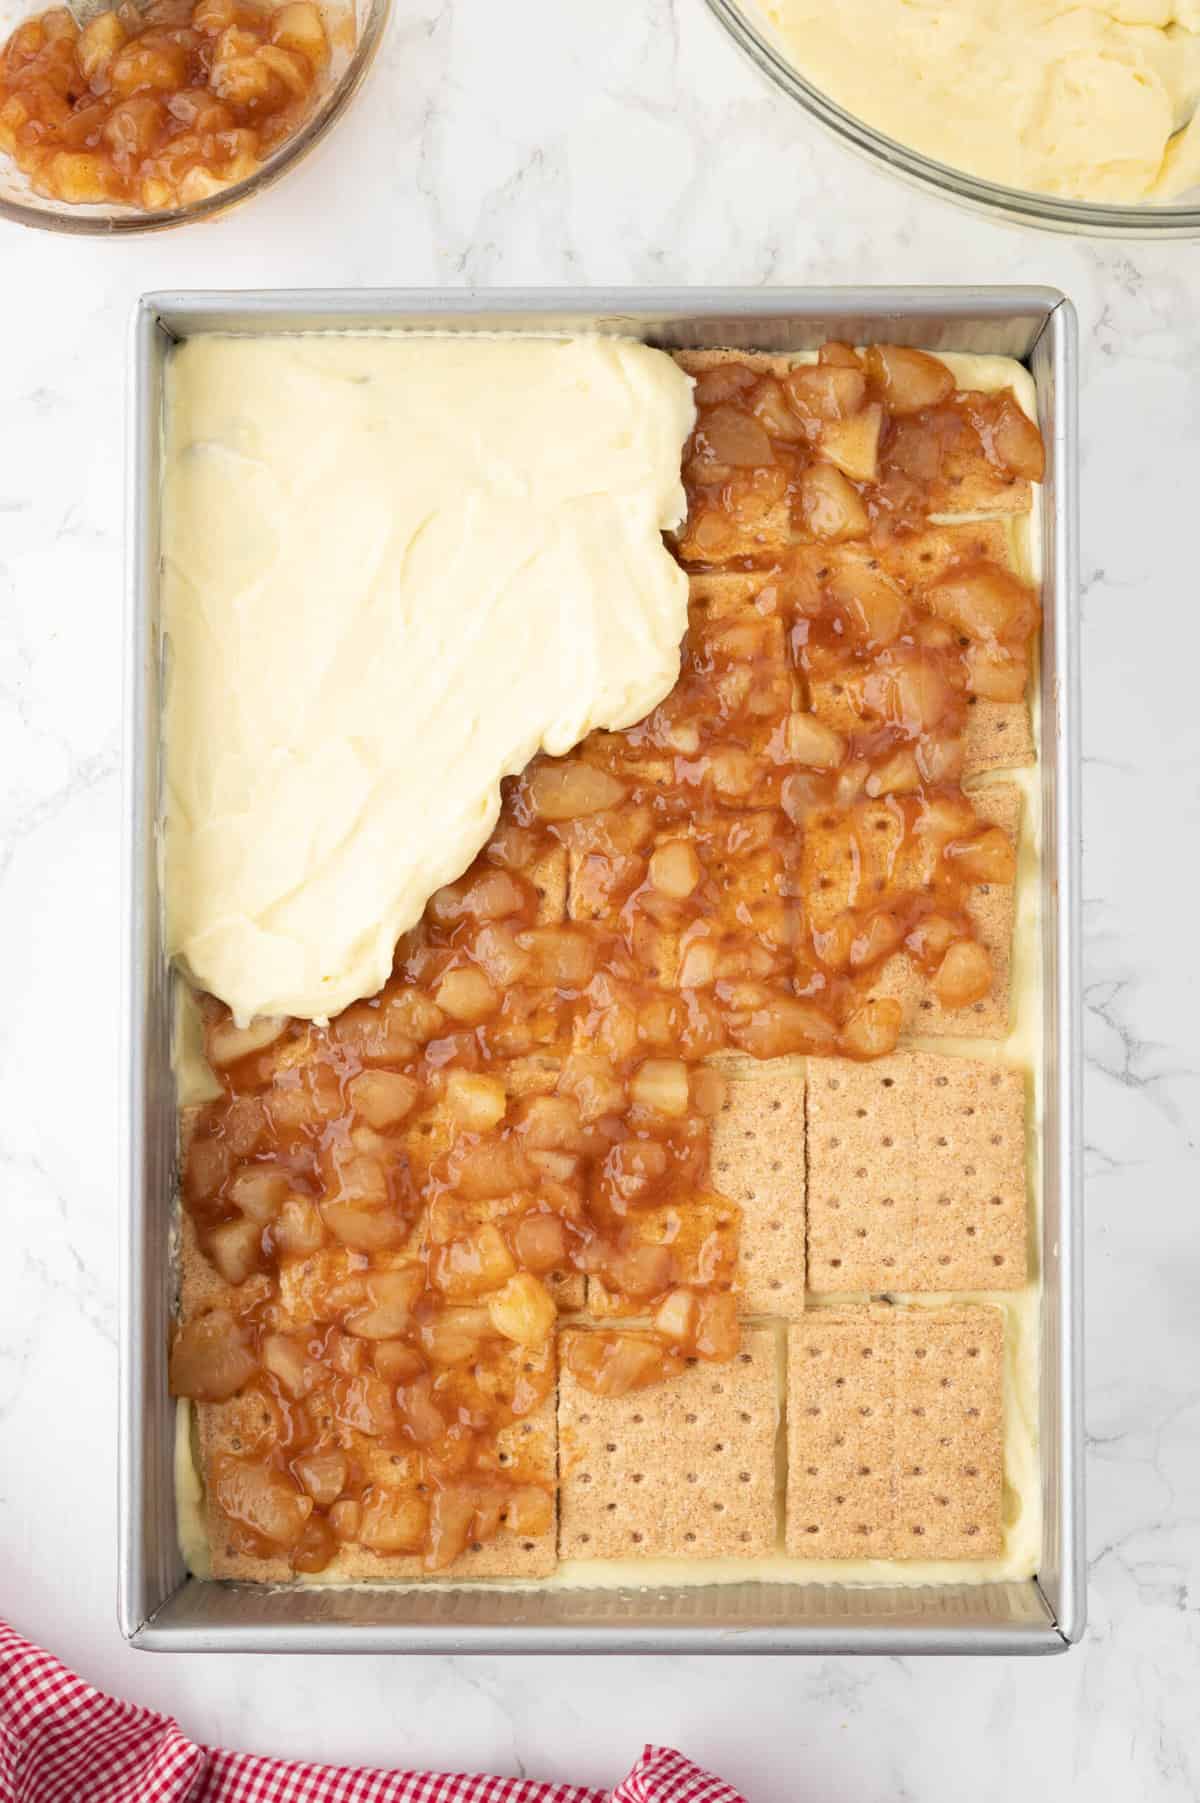 Adding layers of graham cracker, apple pie filling, and vanilla pudding in a rectangular baking dish.